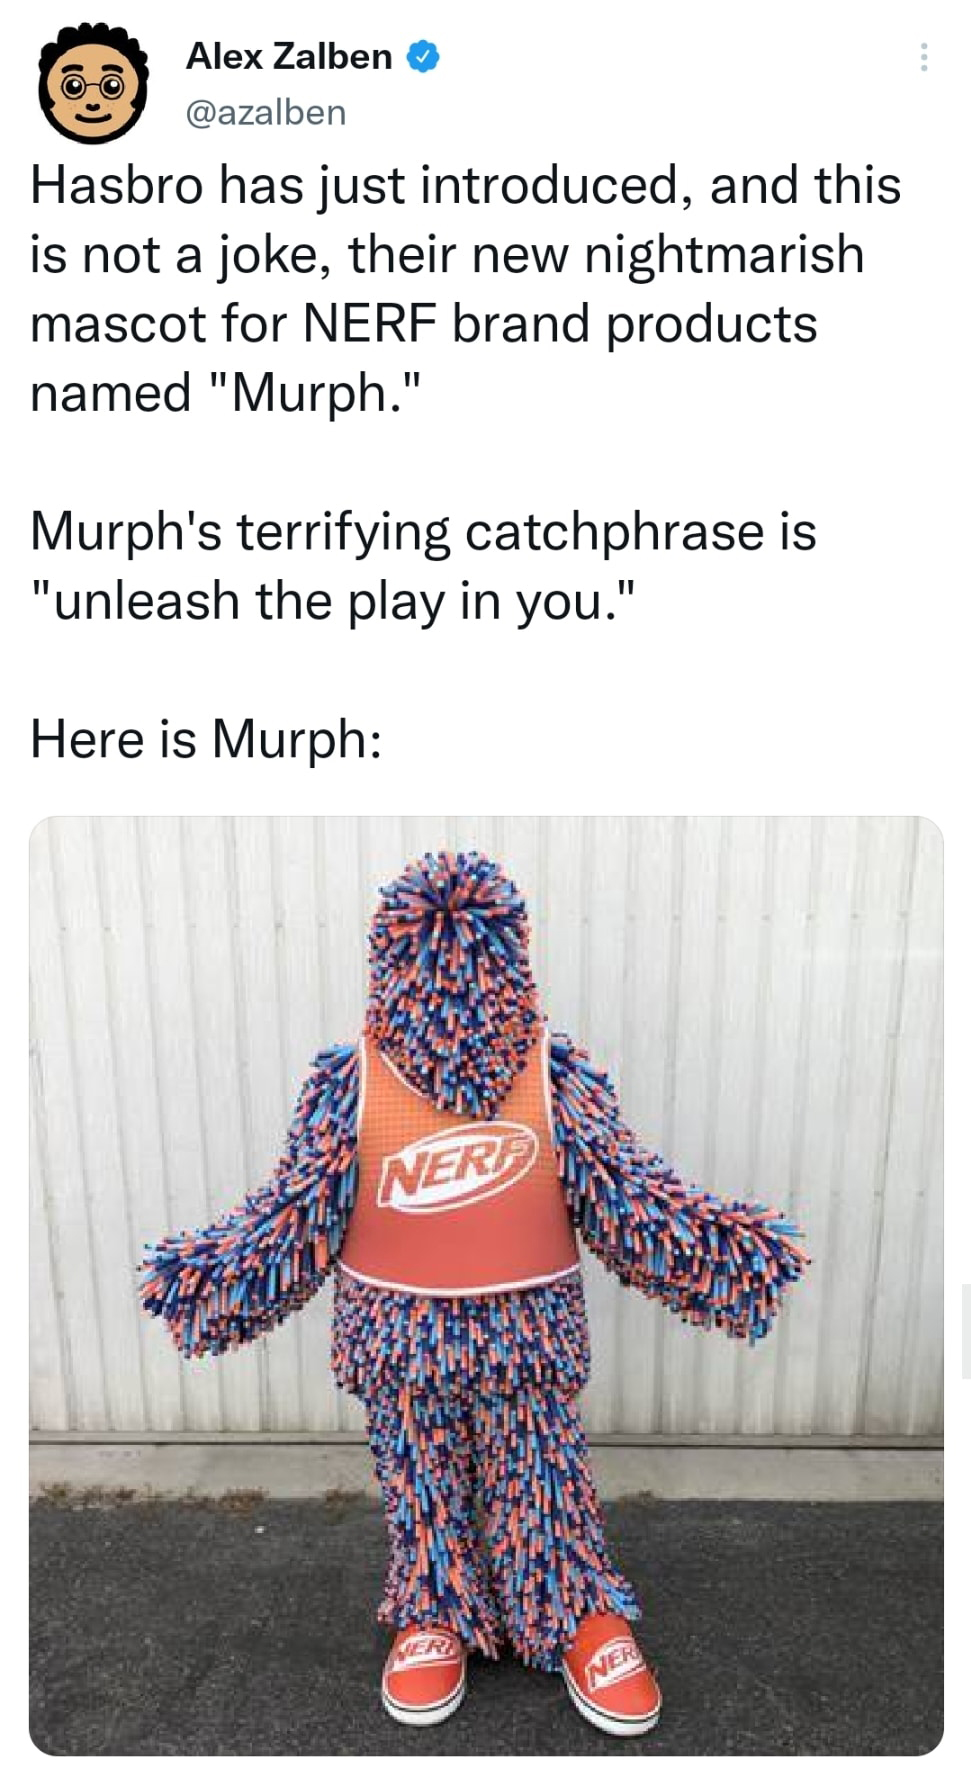 funny memes and pics - murph nerf mascot - Alex Zalben Hasbro has just introduced, and this is not a joke, their new nightmarish mascot for Nerf brand products named "Murph." Murph's terrifying catchphrase is "unleash the play in you." Here is Murph Ner N